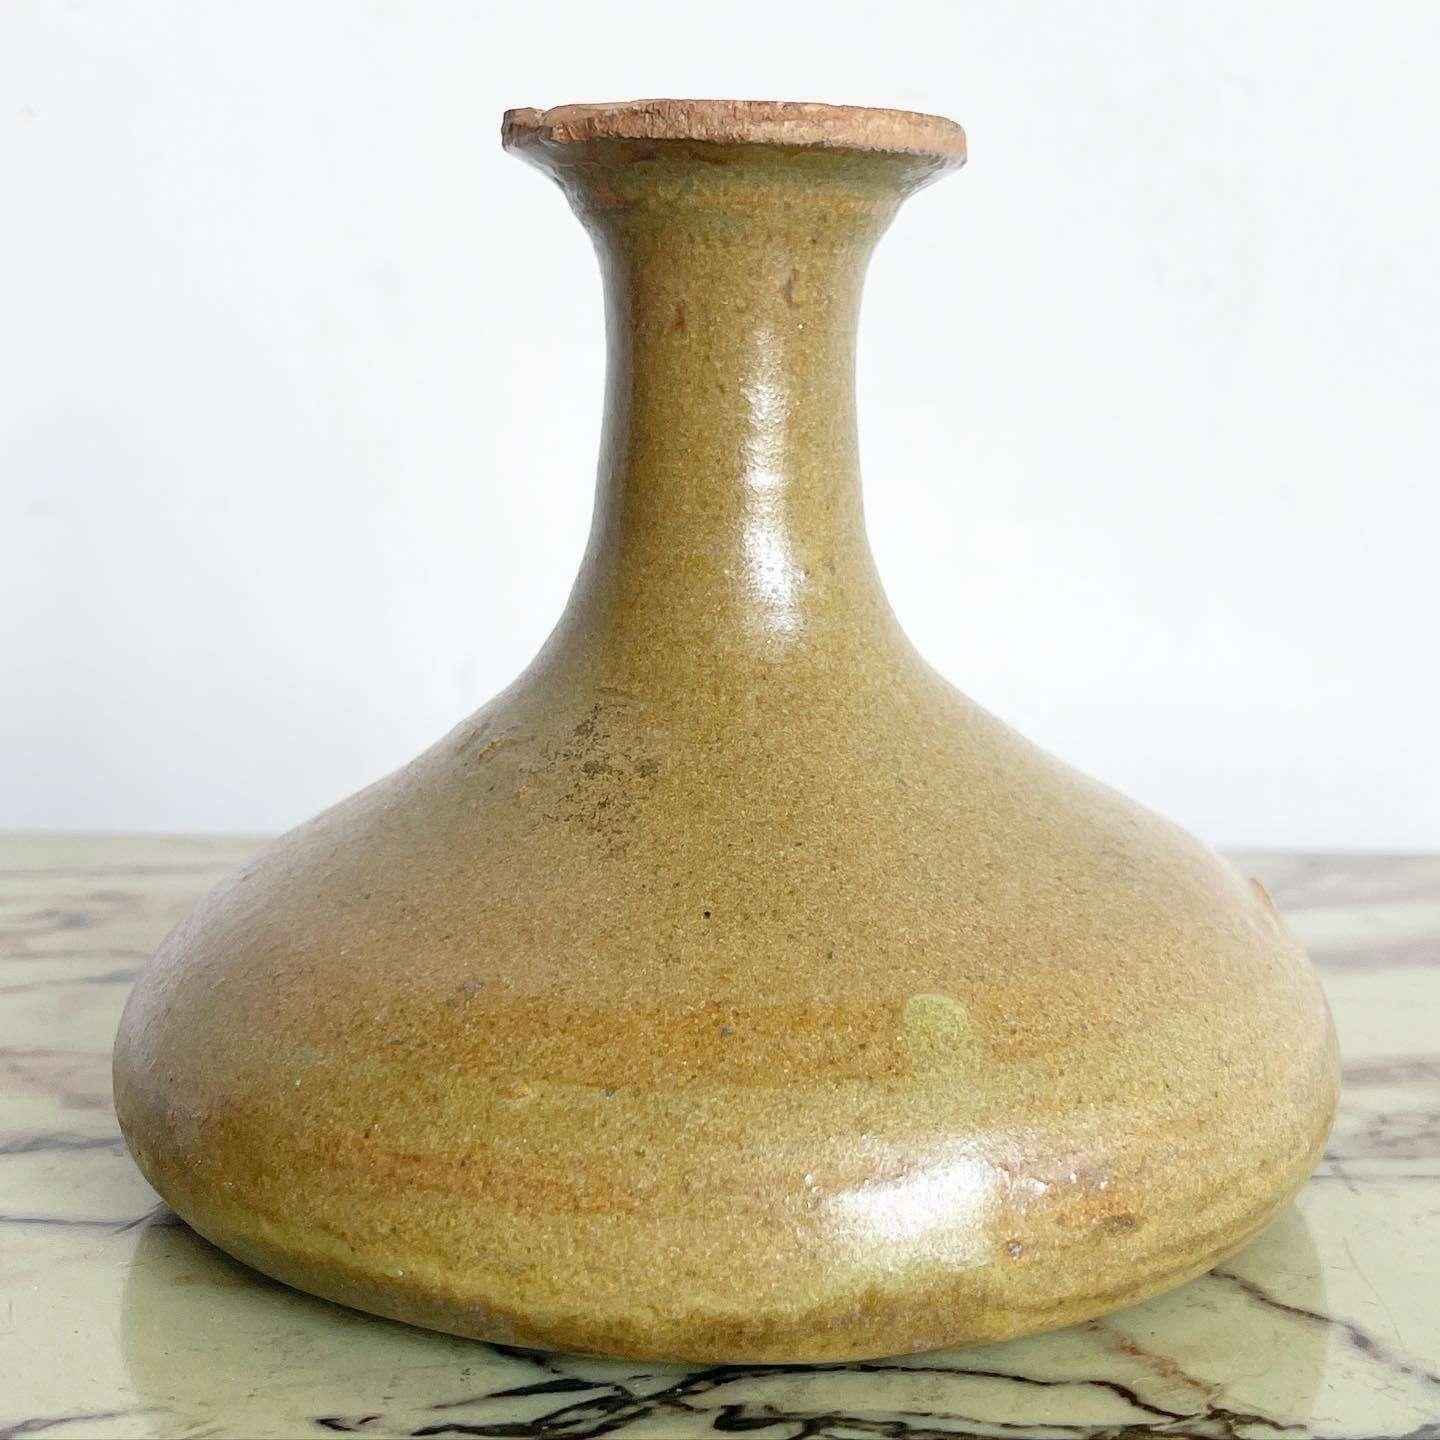 Embrace the timeless elegance of this exceptional vintage mid-century modern pottery vase. Handmade with care, this vase showcases a beautiful light brown hue and a graceful tulip shape, making it a stunning centerpiece for any mid-century or